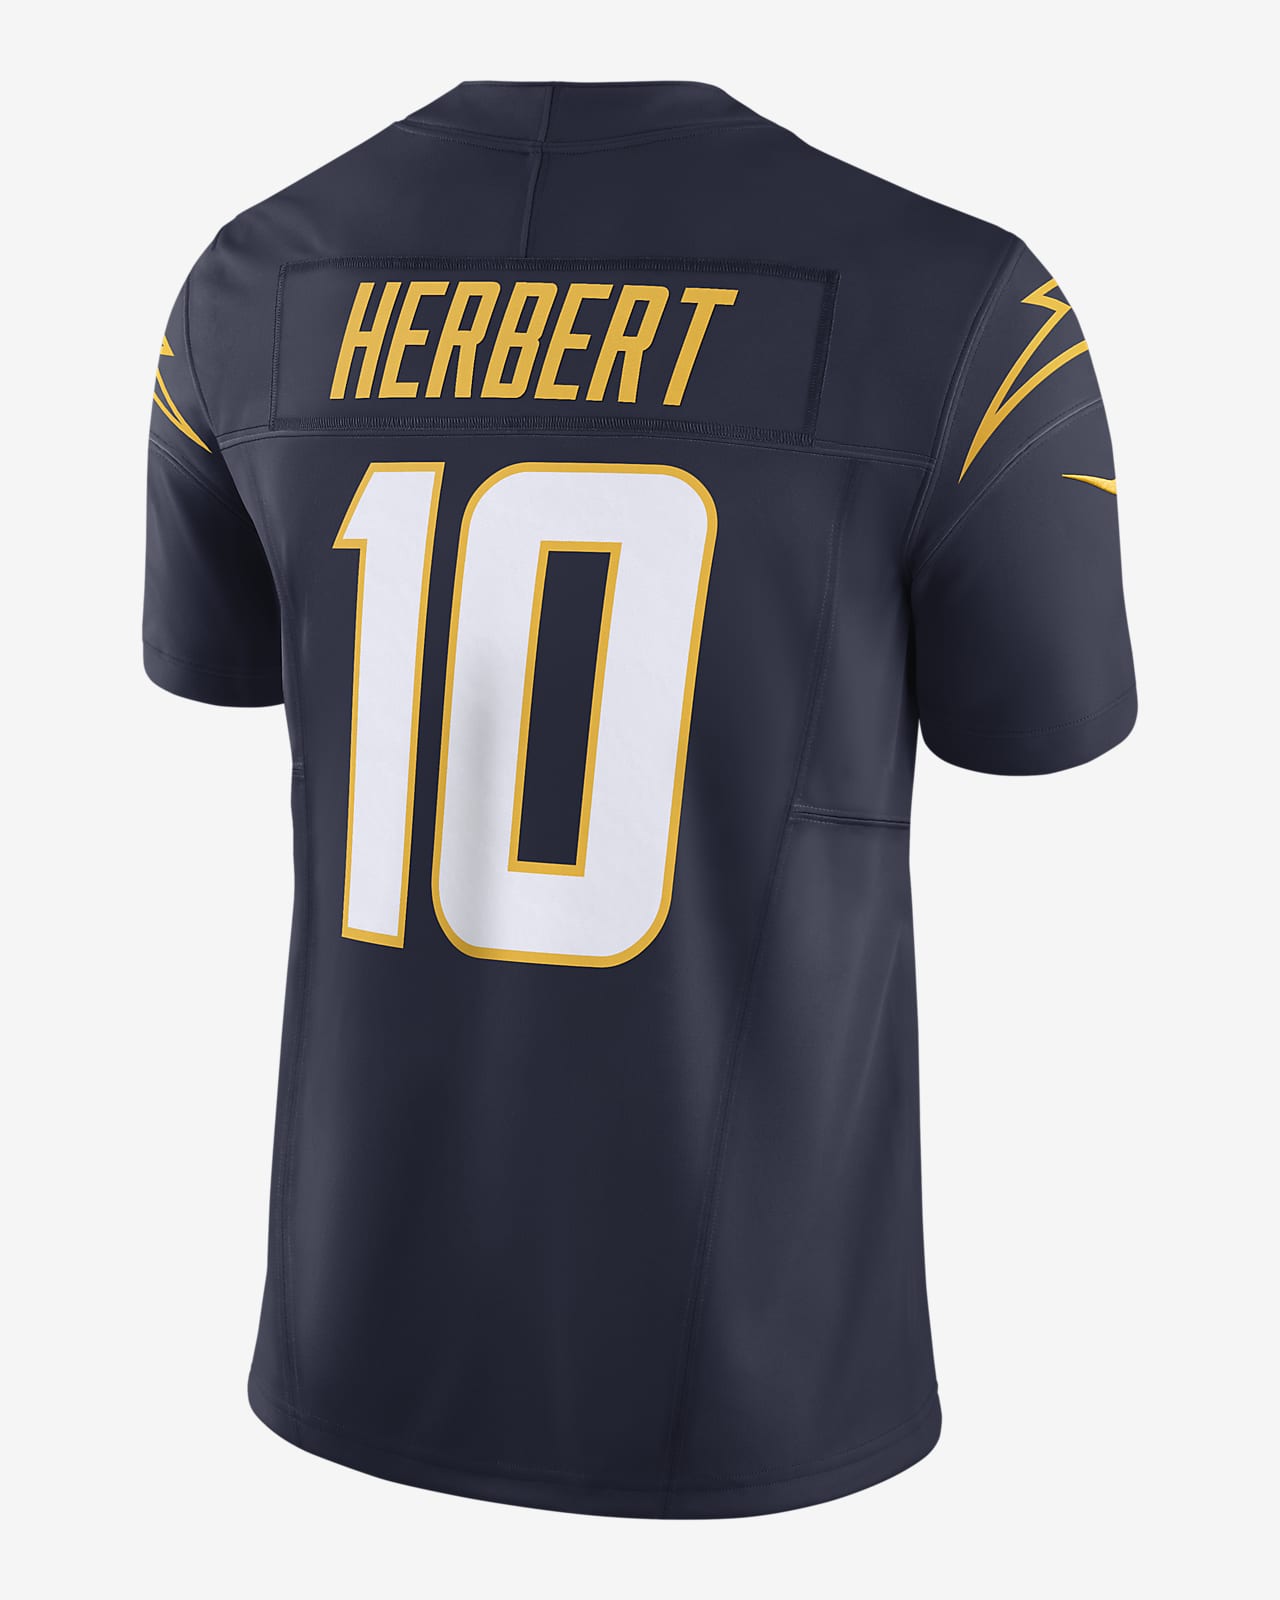 Justin Herbert Los Angeles Chargers Men's Nike Dri-FIT NFL Limited Football  Jersey